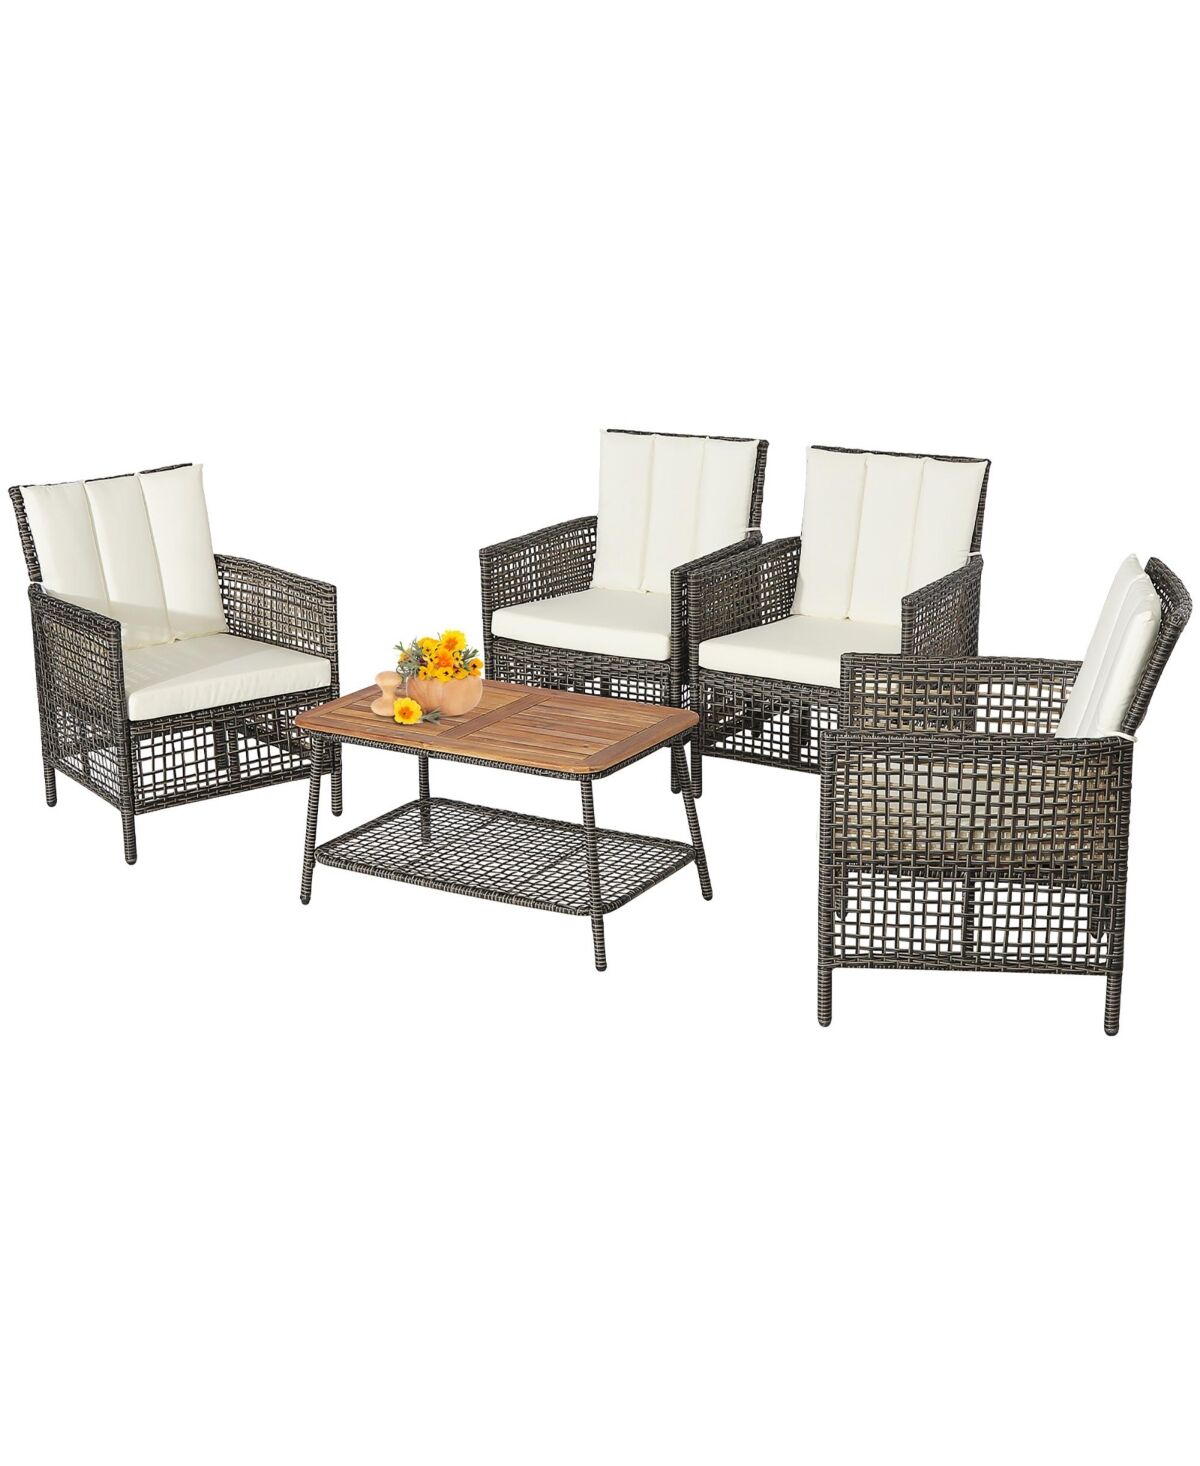 Costway 5PCS Patio Rattan Furniture Set Cushioned Sofa Armrest Wooden Tabletop - White